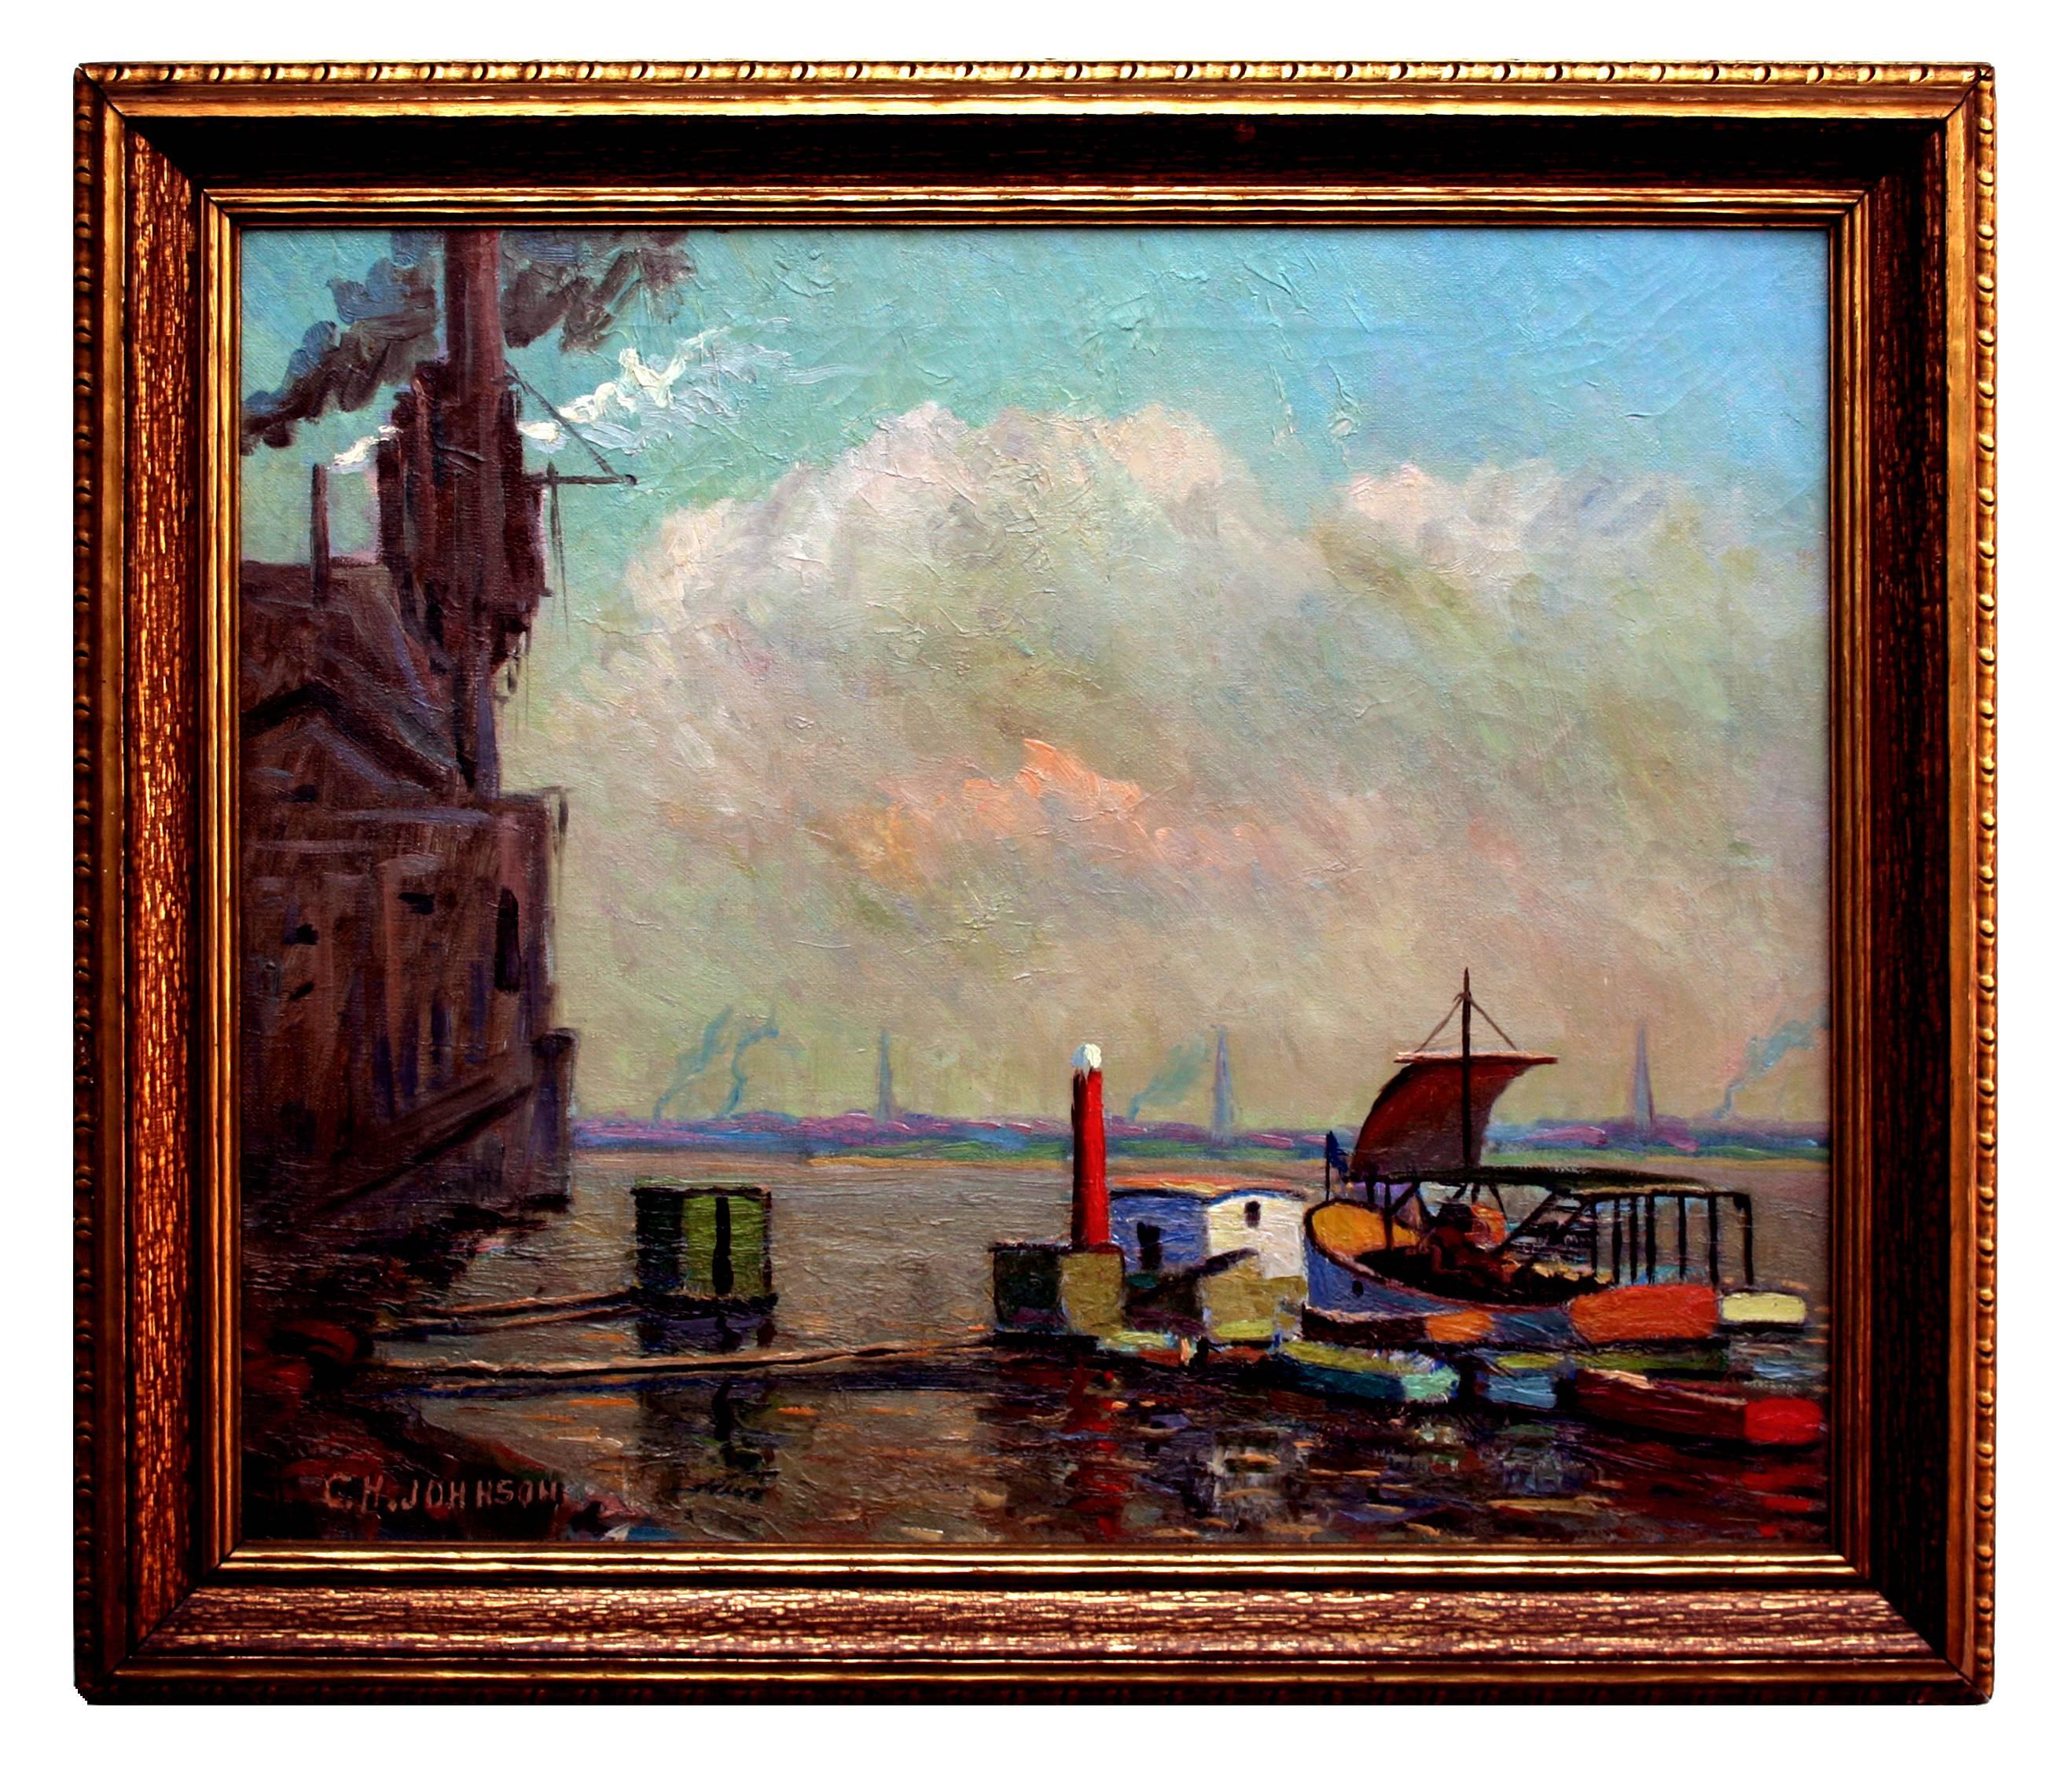  Mid Century Industrial Seascape -- Gloucester Harbor - Painting by Charles Johnson